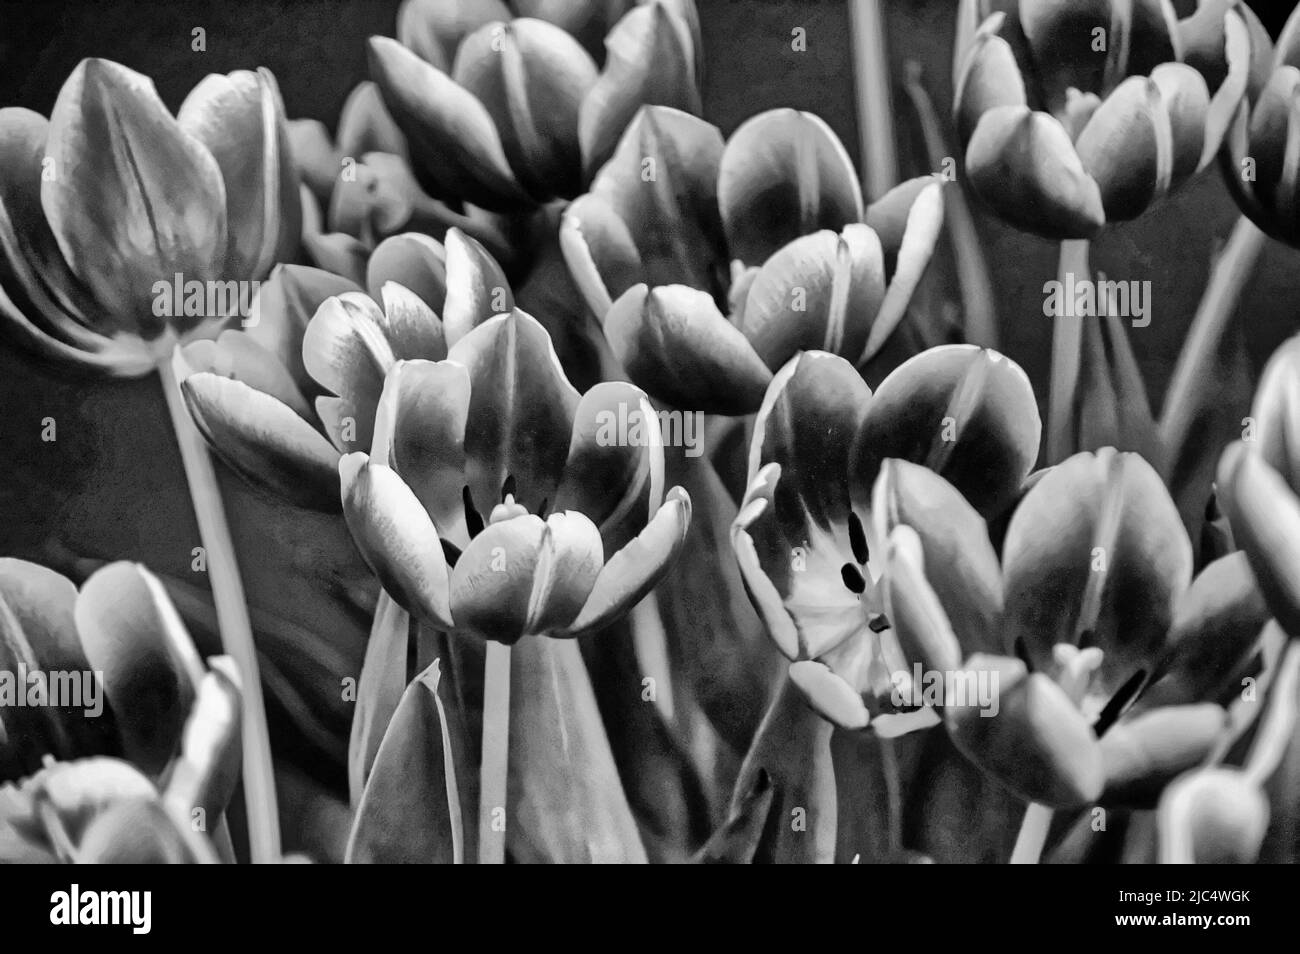 Tulips Black and White Stock Photos & Images - Alamy